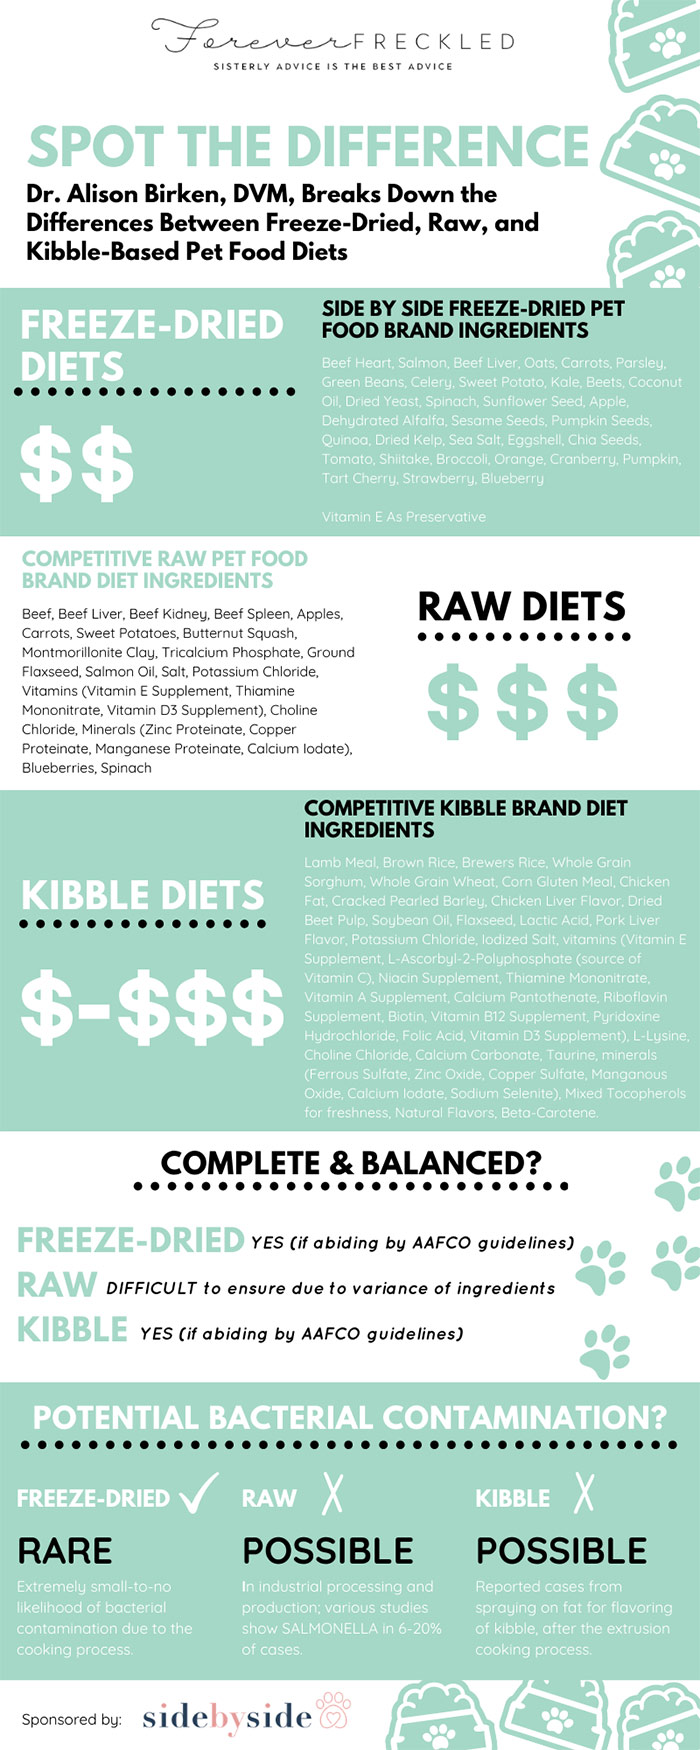 freeze dried, raw, or kibble dog food infographic